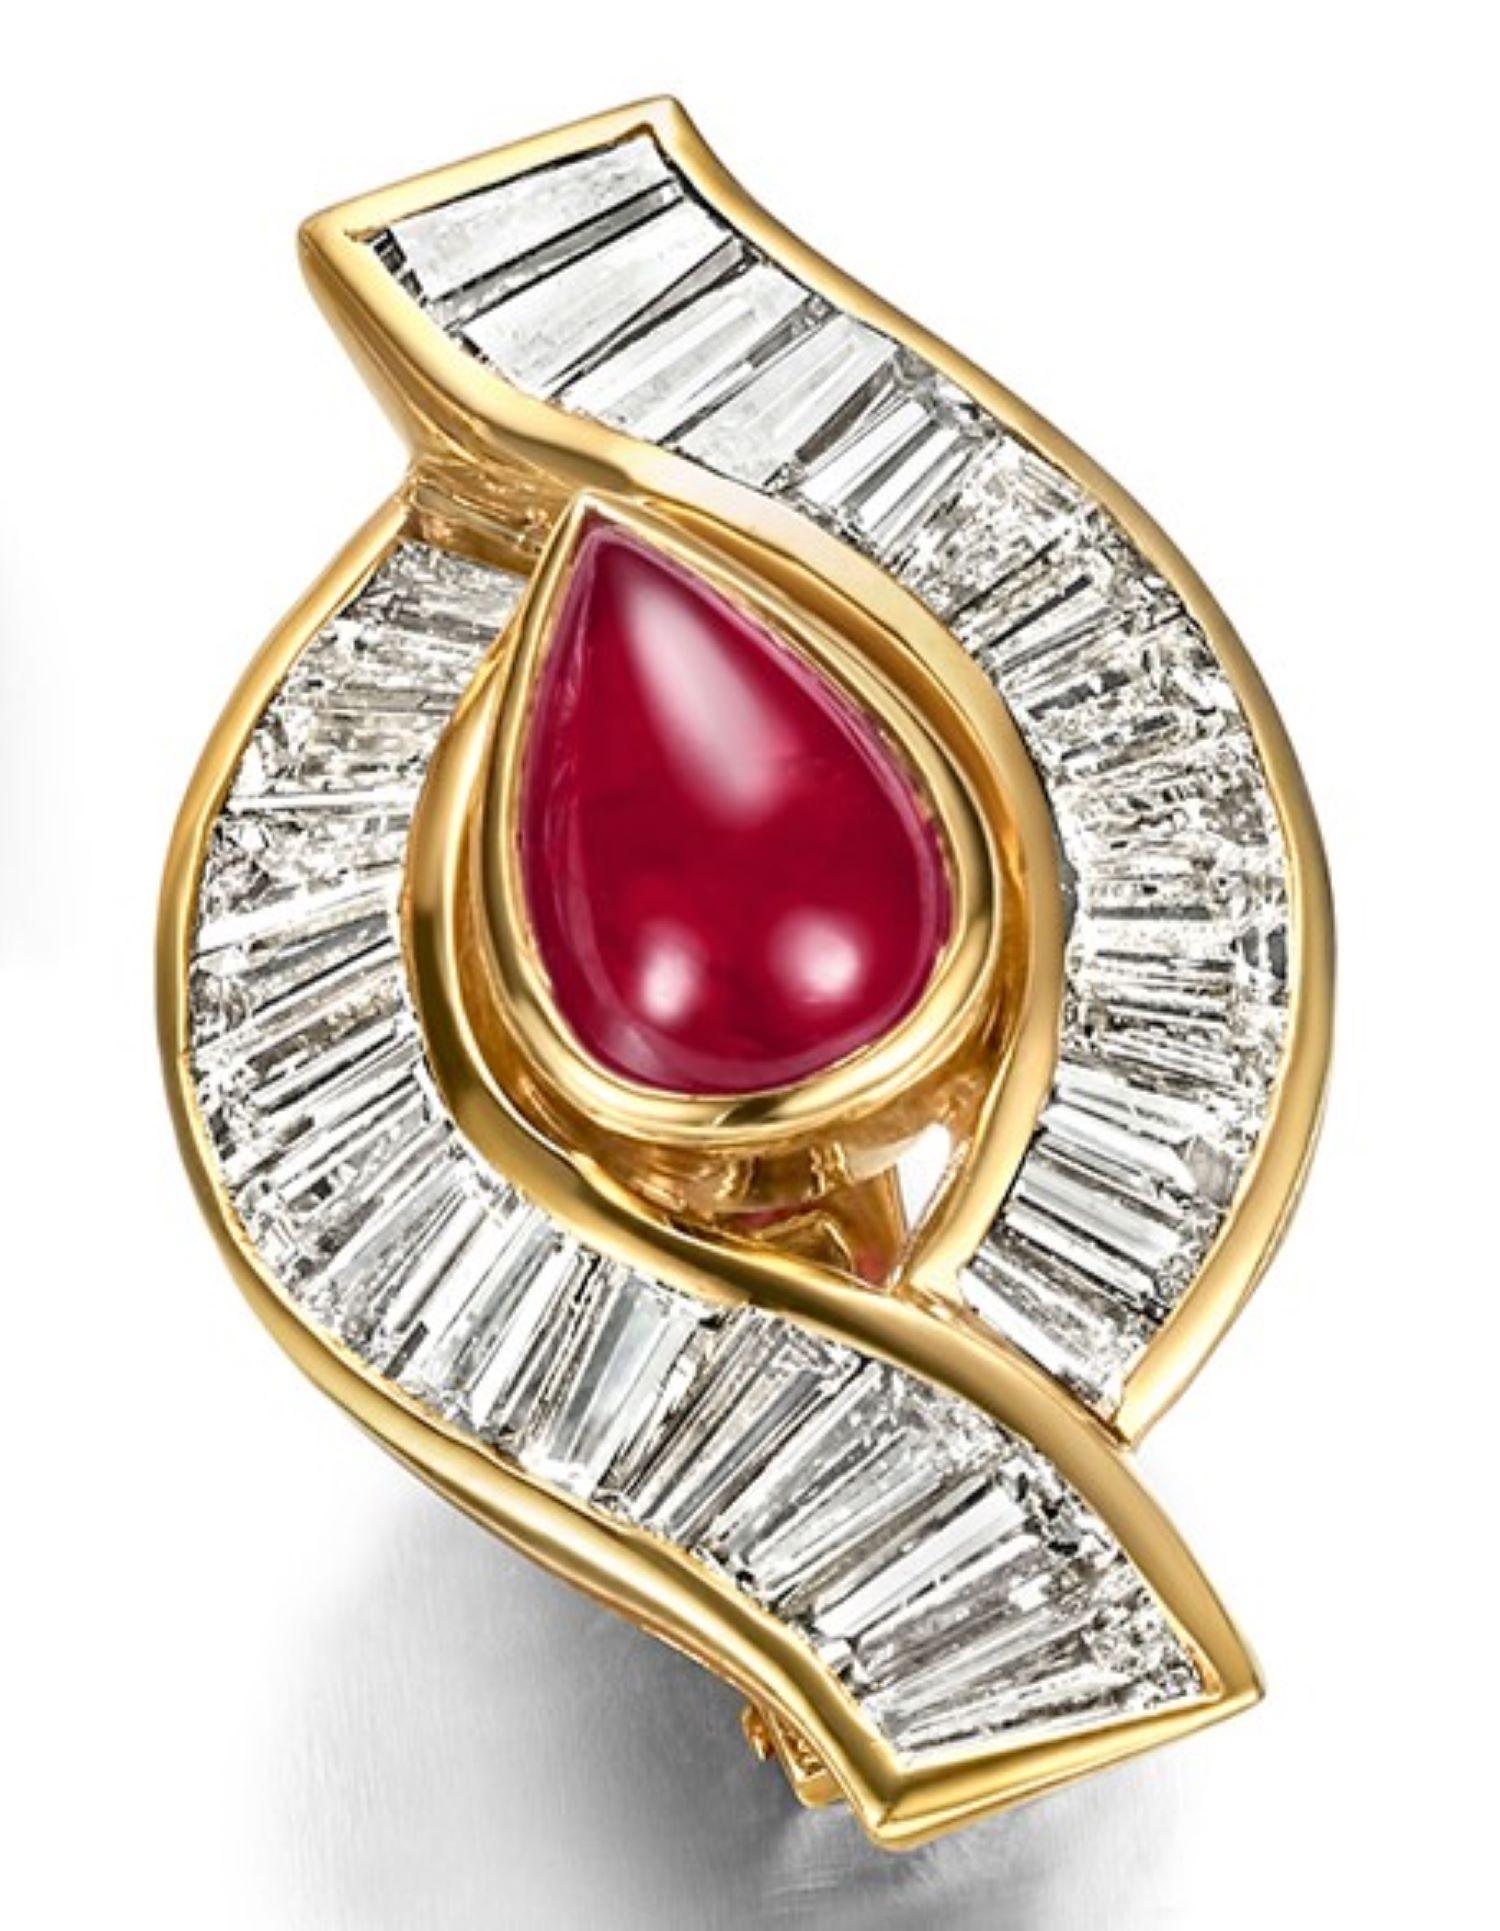 Adler Genèva Gorgeous Clip - On Earrings With 3.9 Ct  Cabochon Burma Ruby & Baguette Cut Diamonds , Estate His Majesty The Sultan Of Oman Qaboos Bin Said

One of A kind Piece of Art Earrings made to Special Order, Diamonds cut To measure !

The